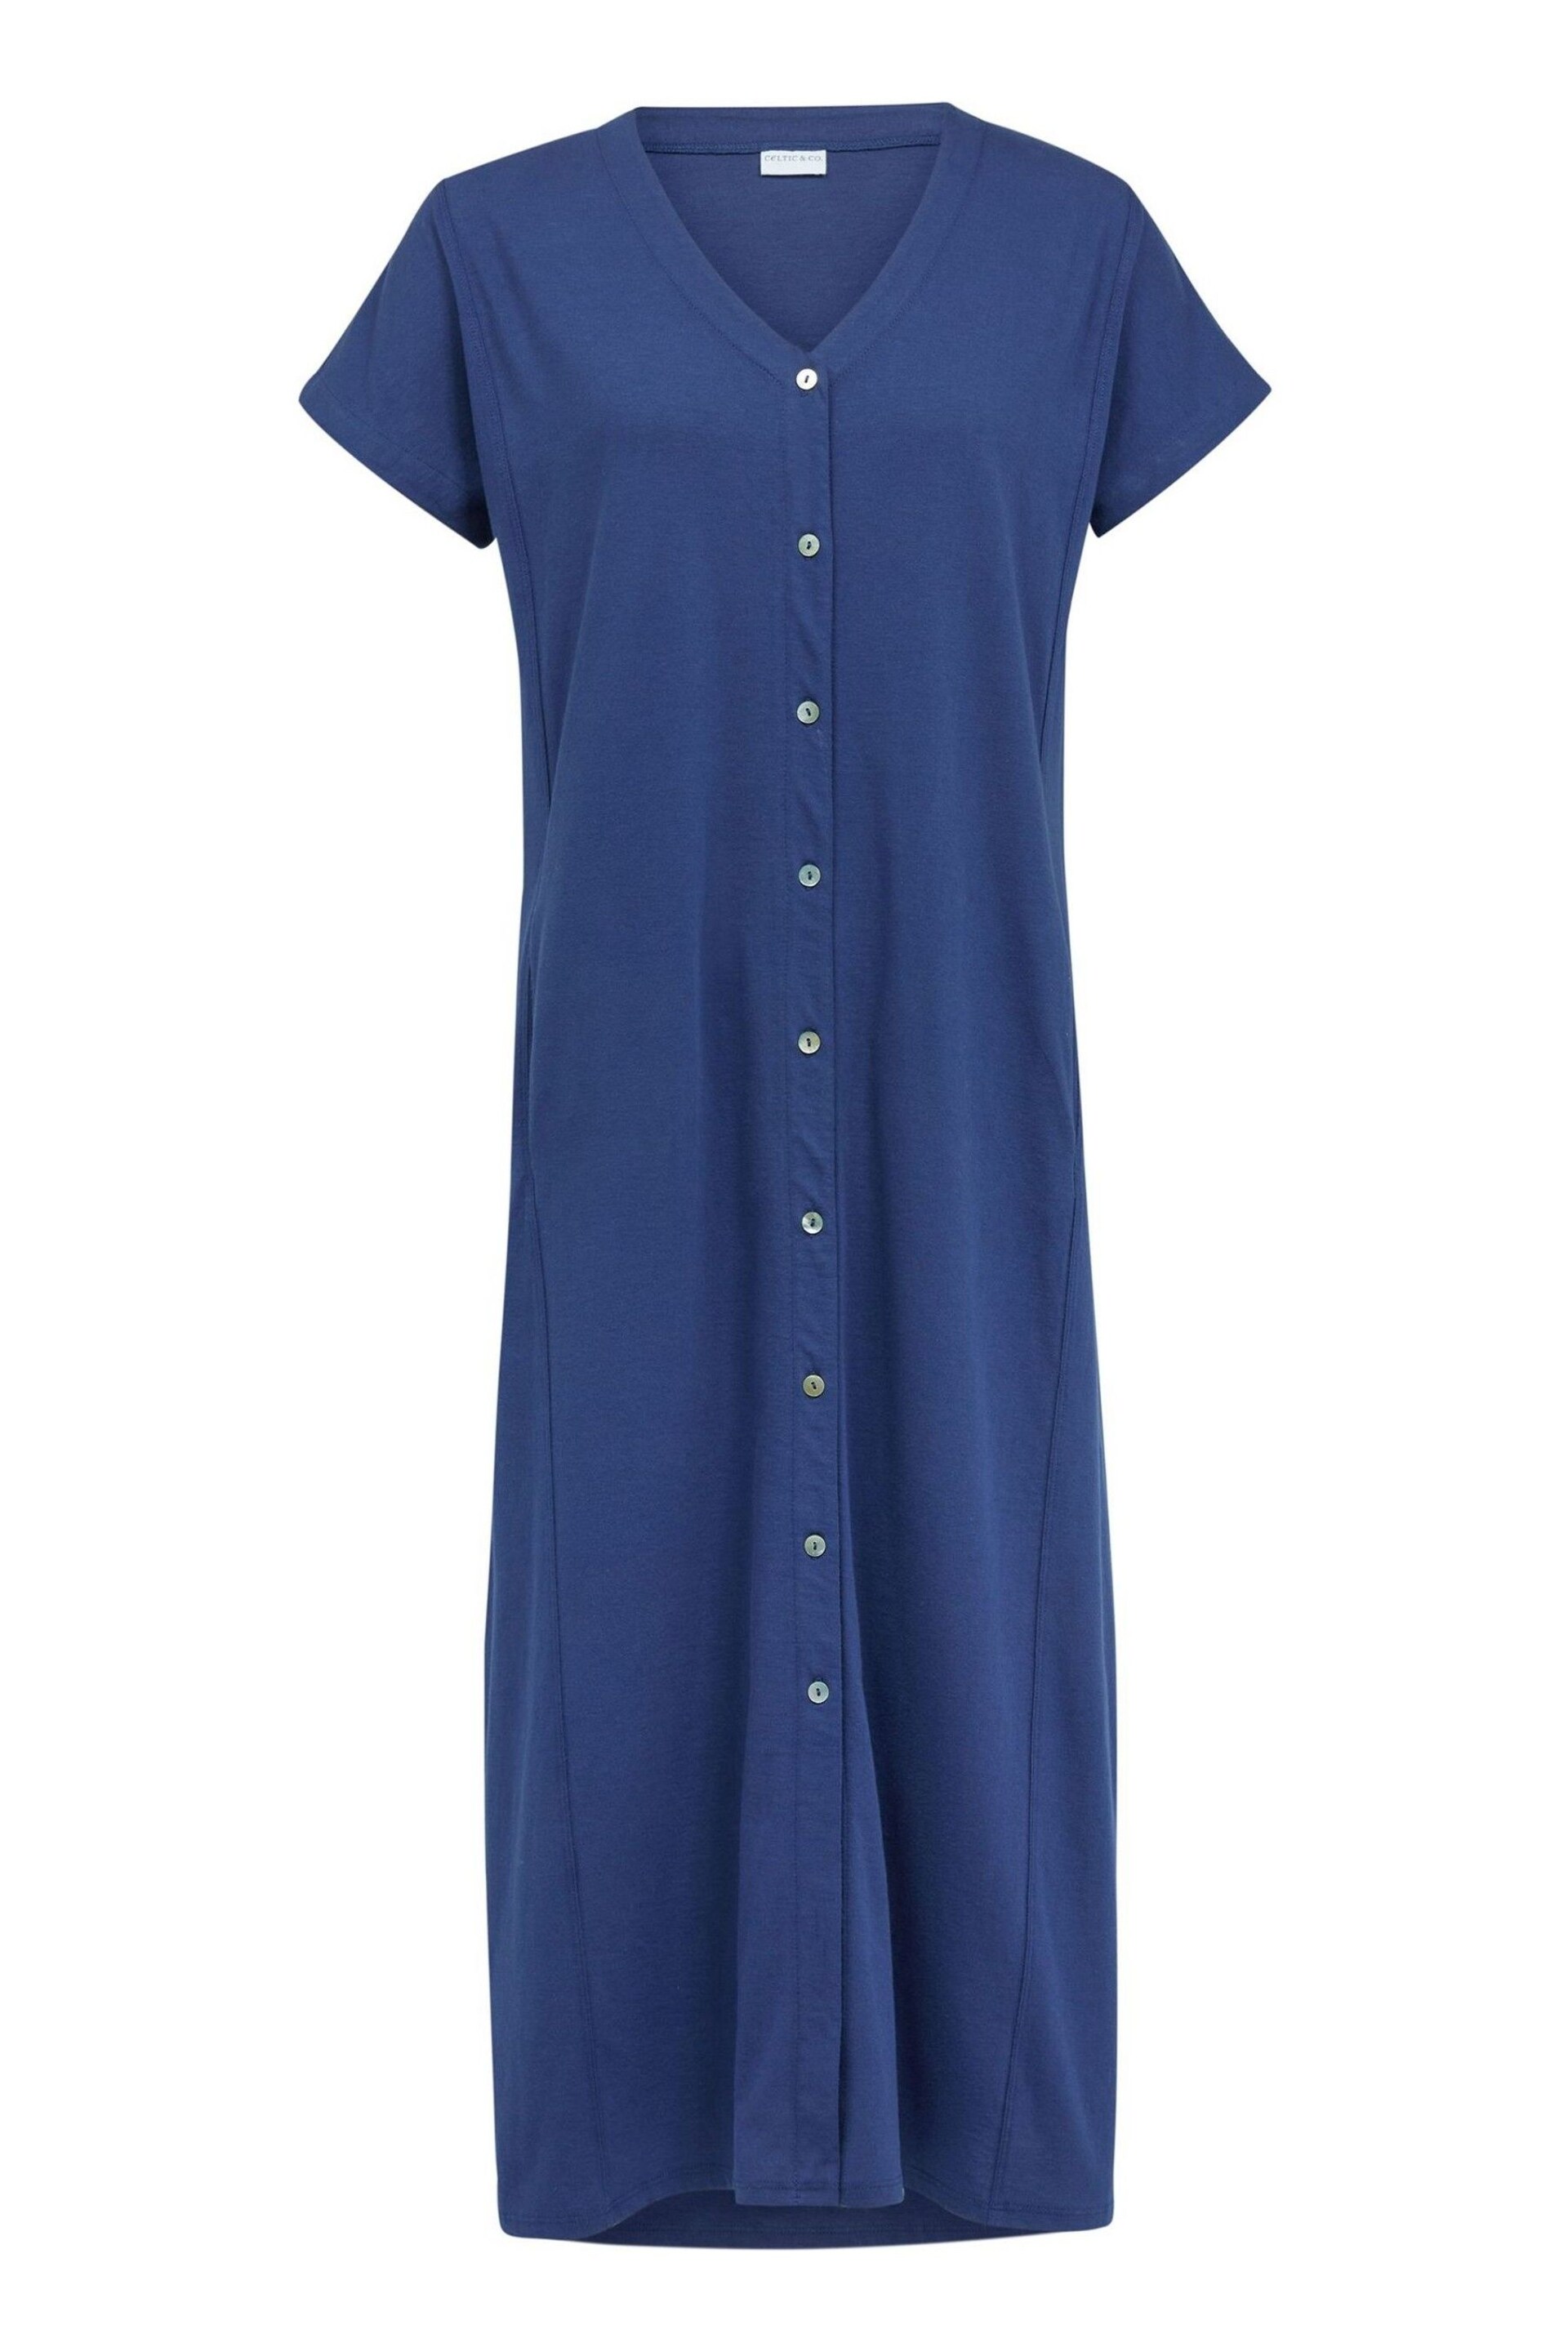 Celtic & Co. Button Through Jersey Midi Dress - Image 3 of 5